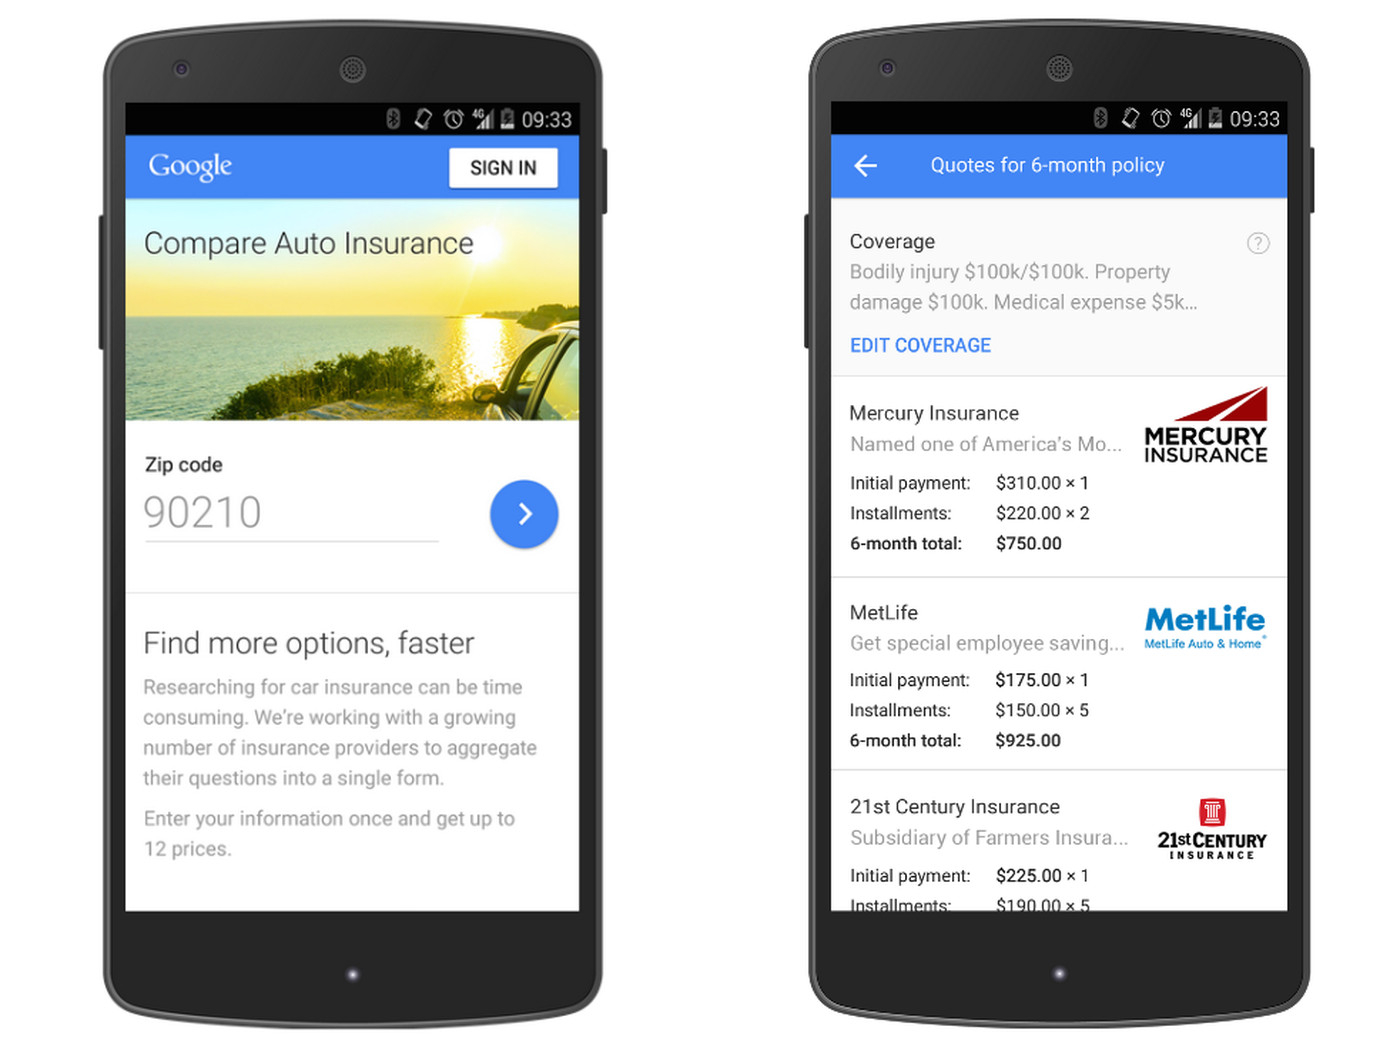 Google Now Lets You Compare Auto Insurance Quotes In within dimensions 1400 X 1050